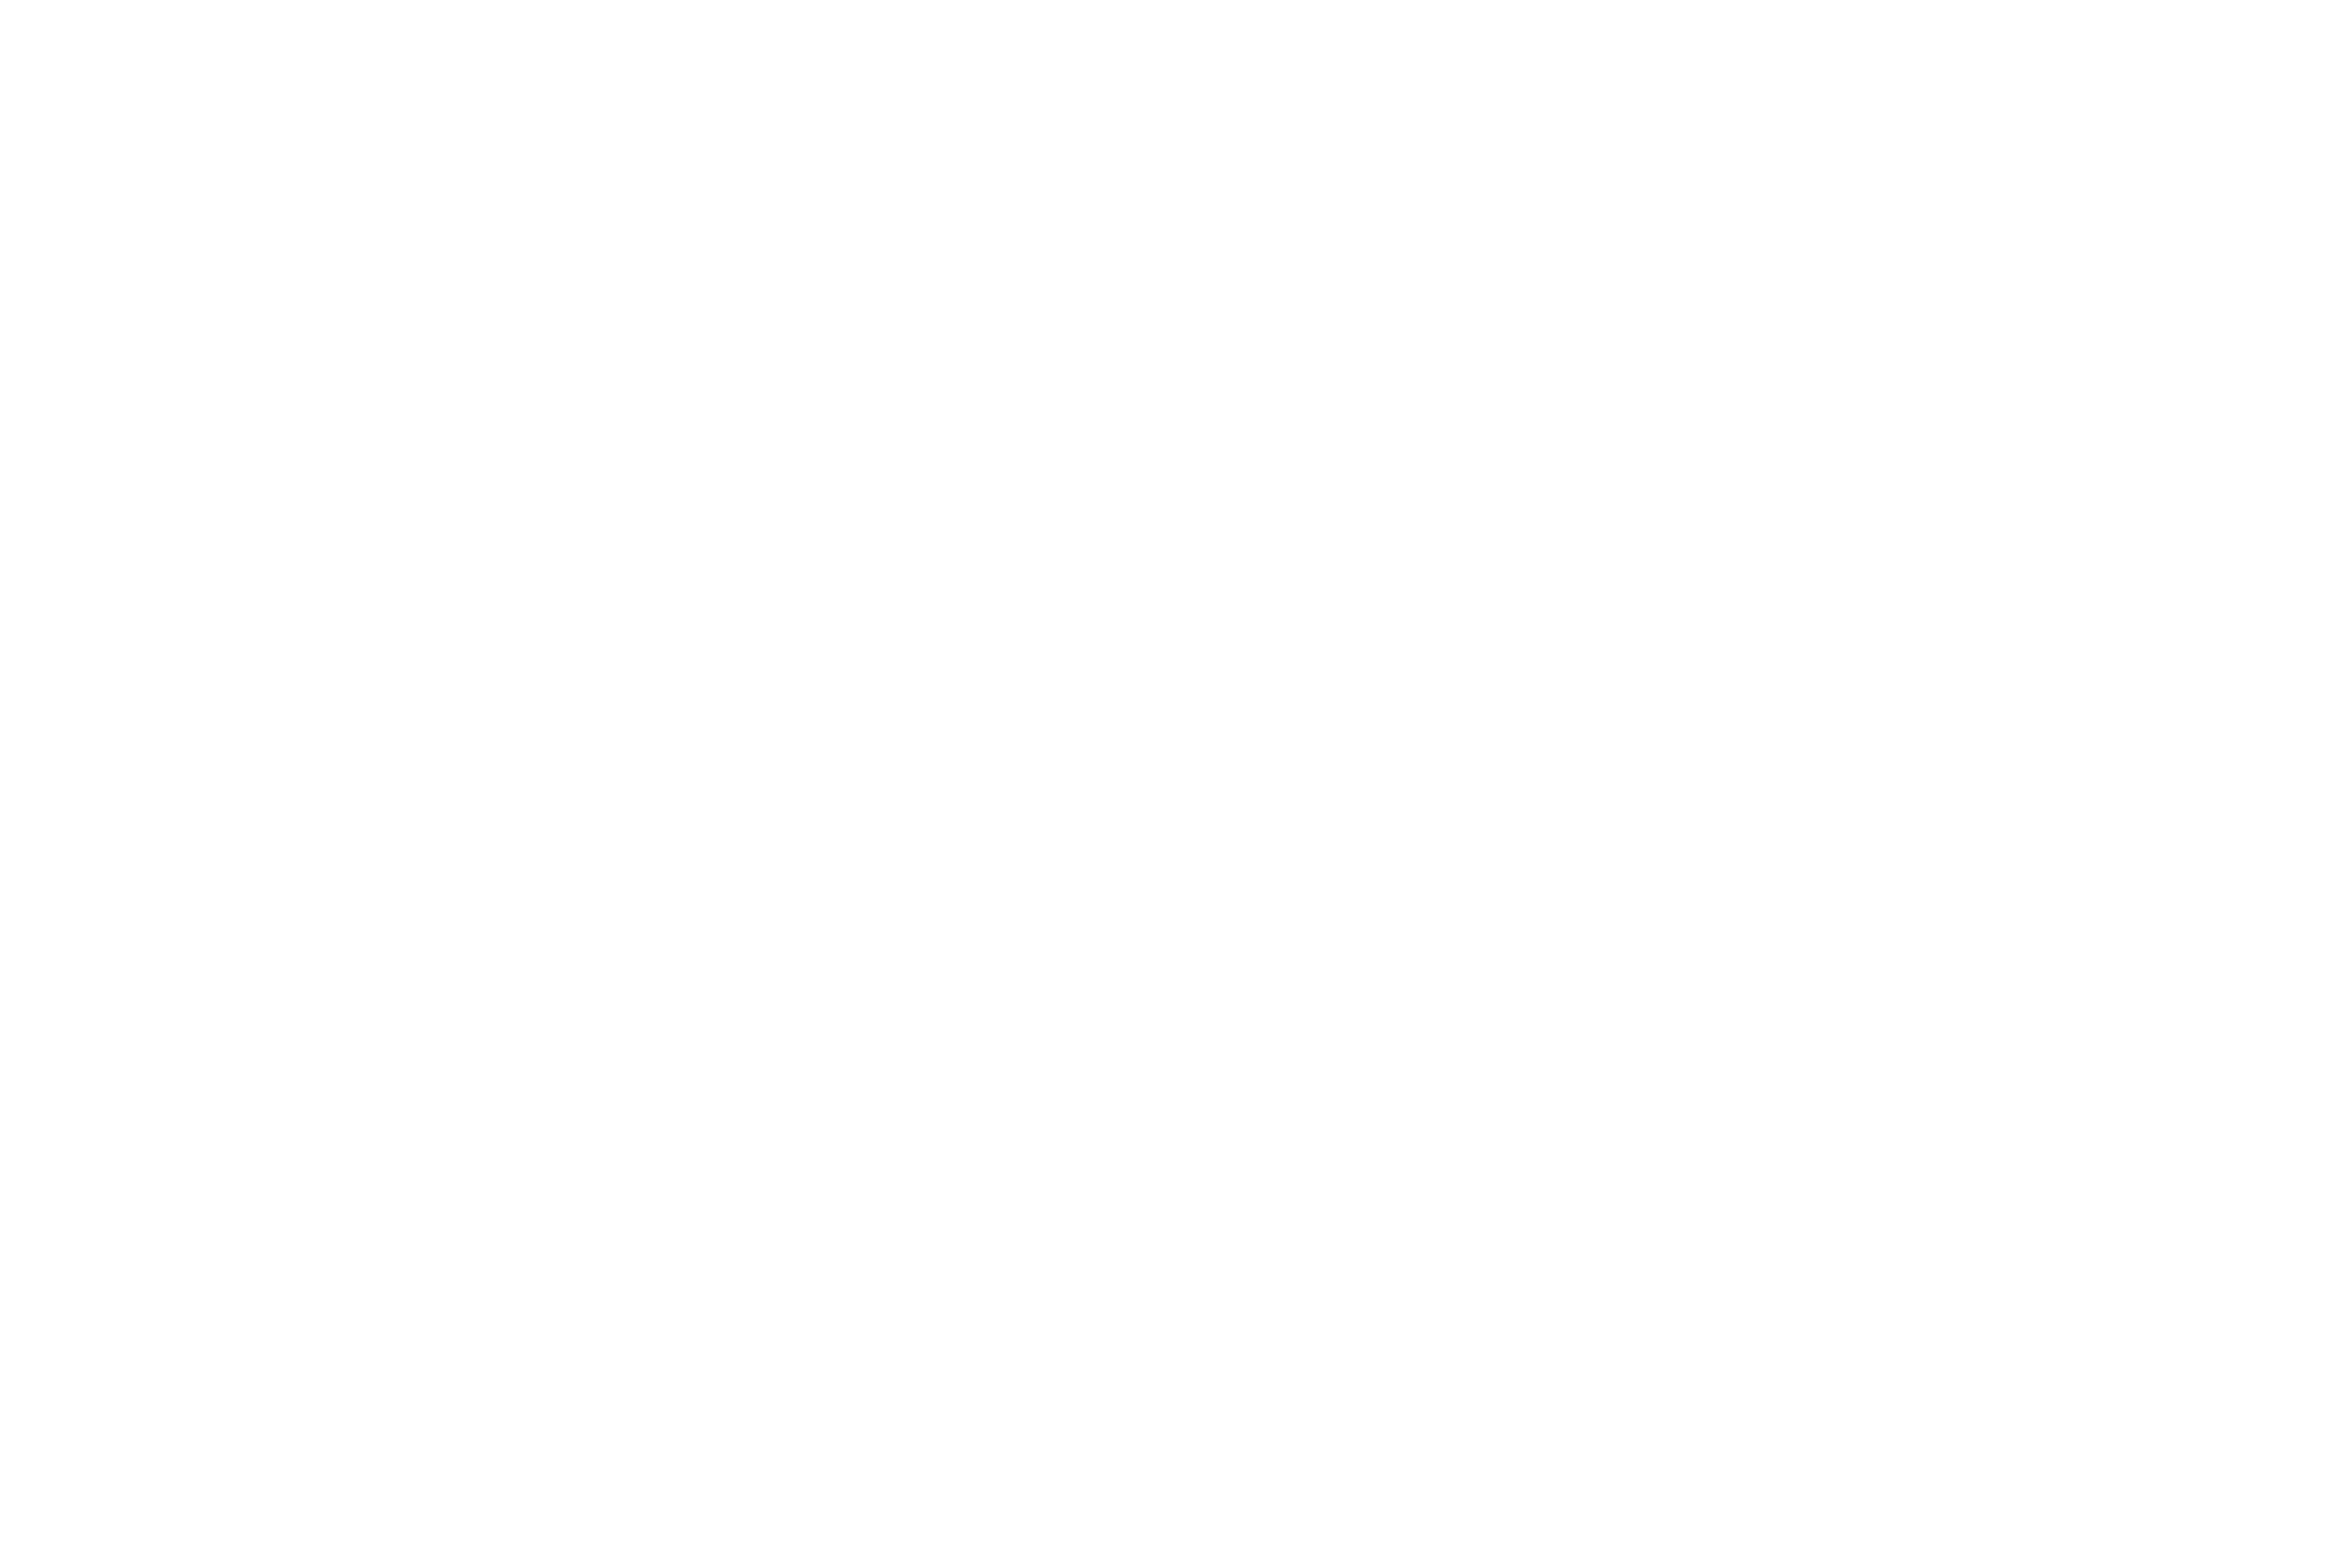 High processing speed up to 90 m/Min.